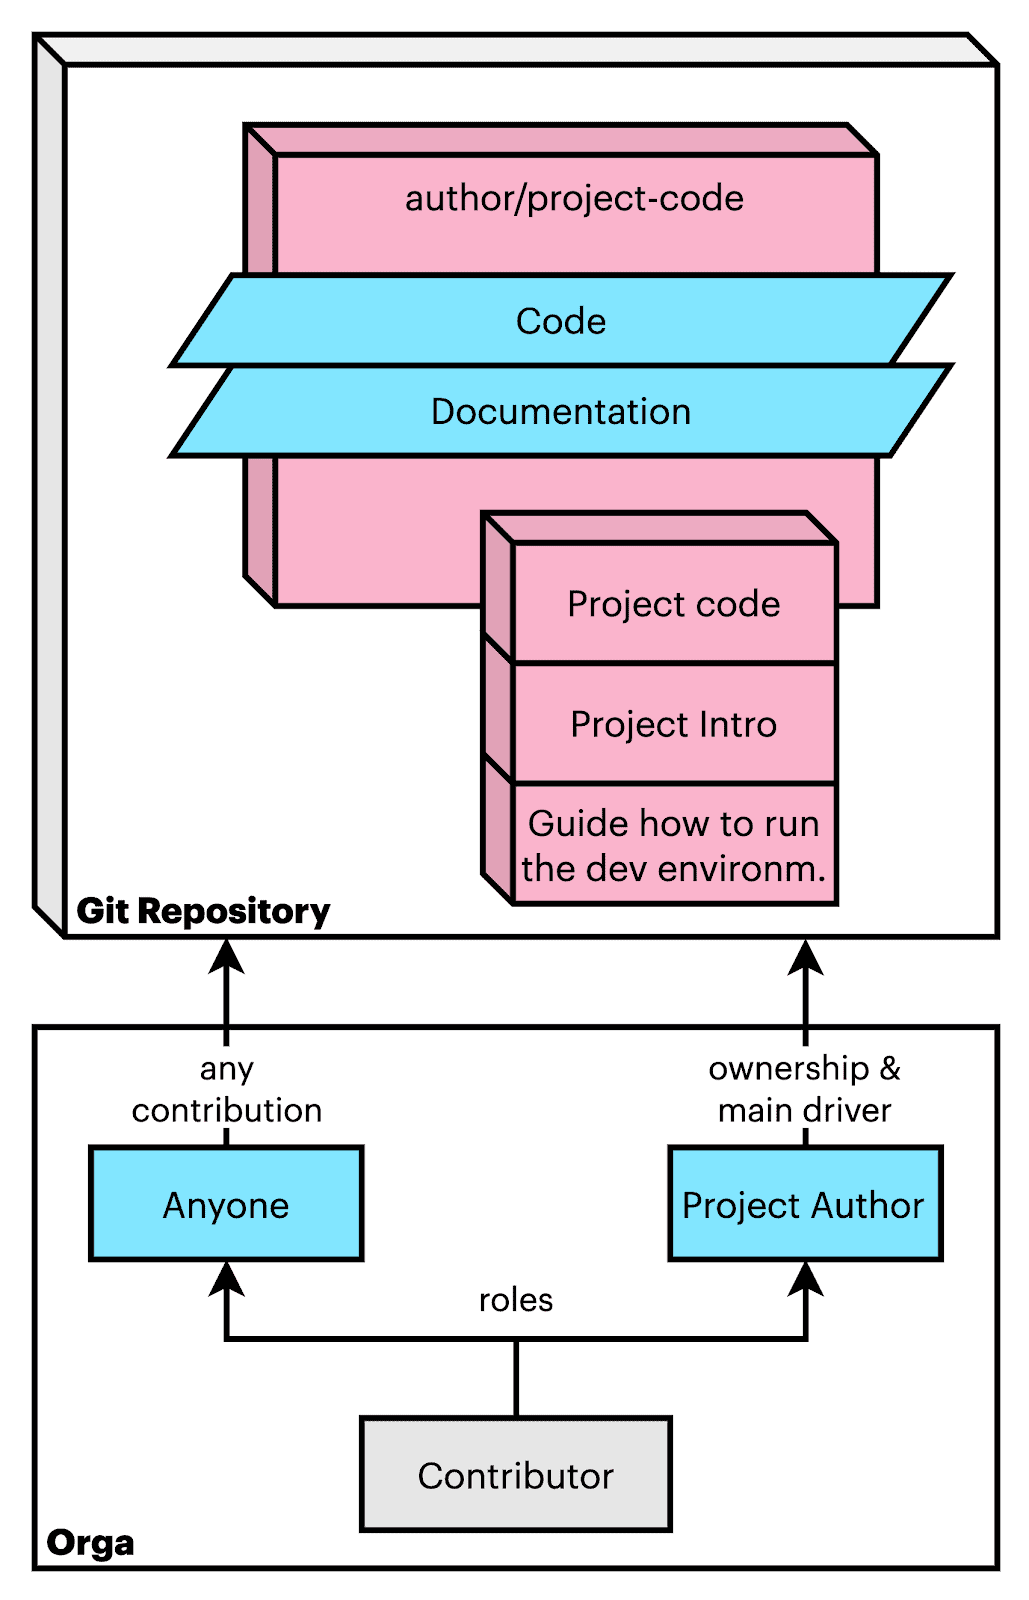 Organiztional project structure for a single maintainer open-source project